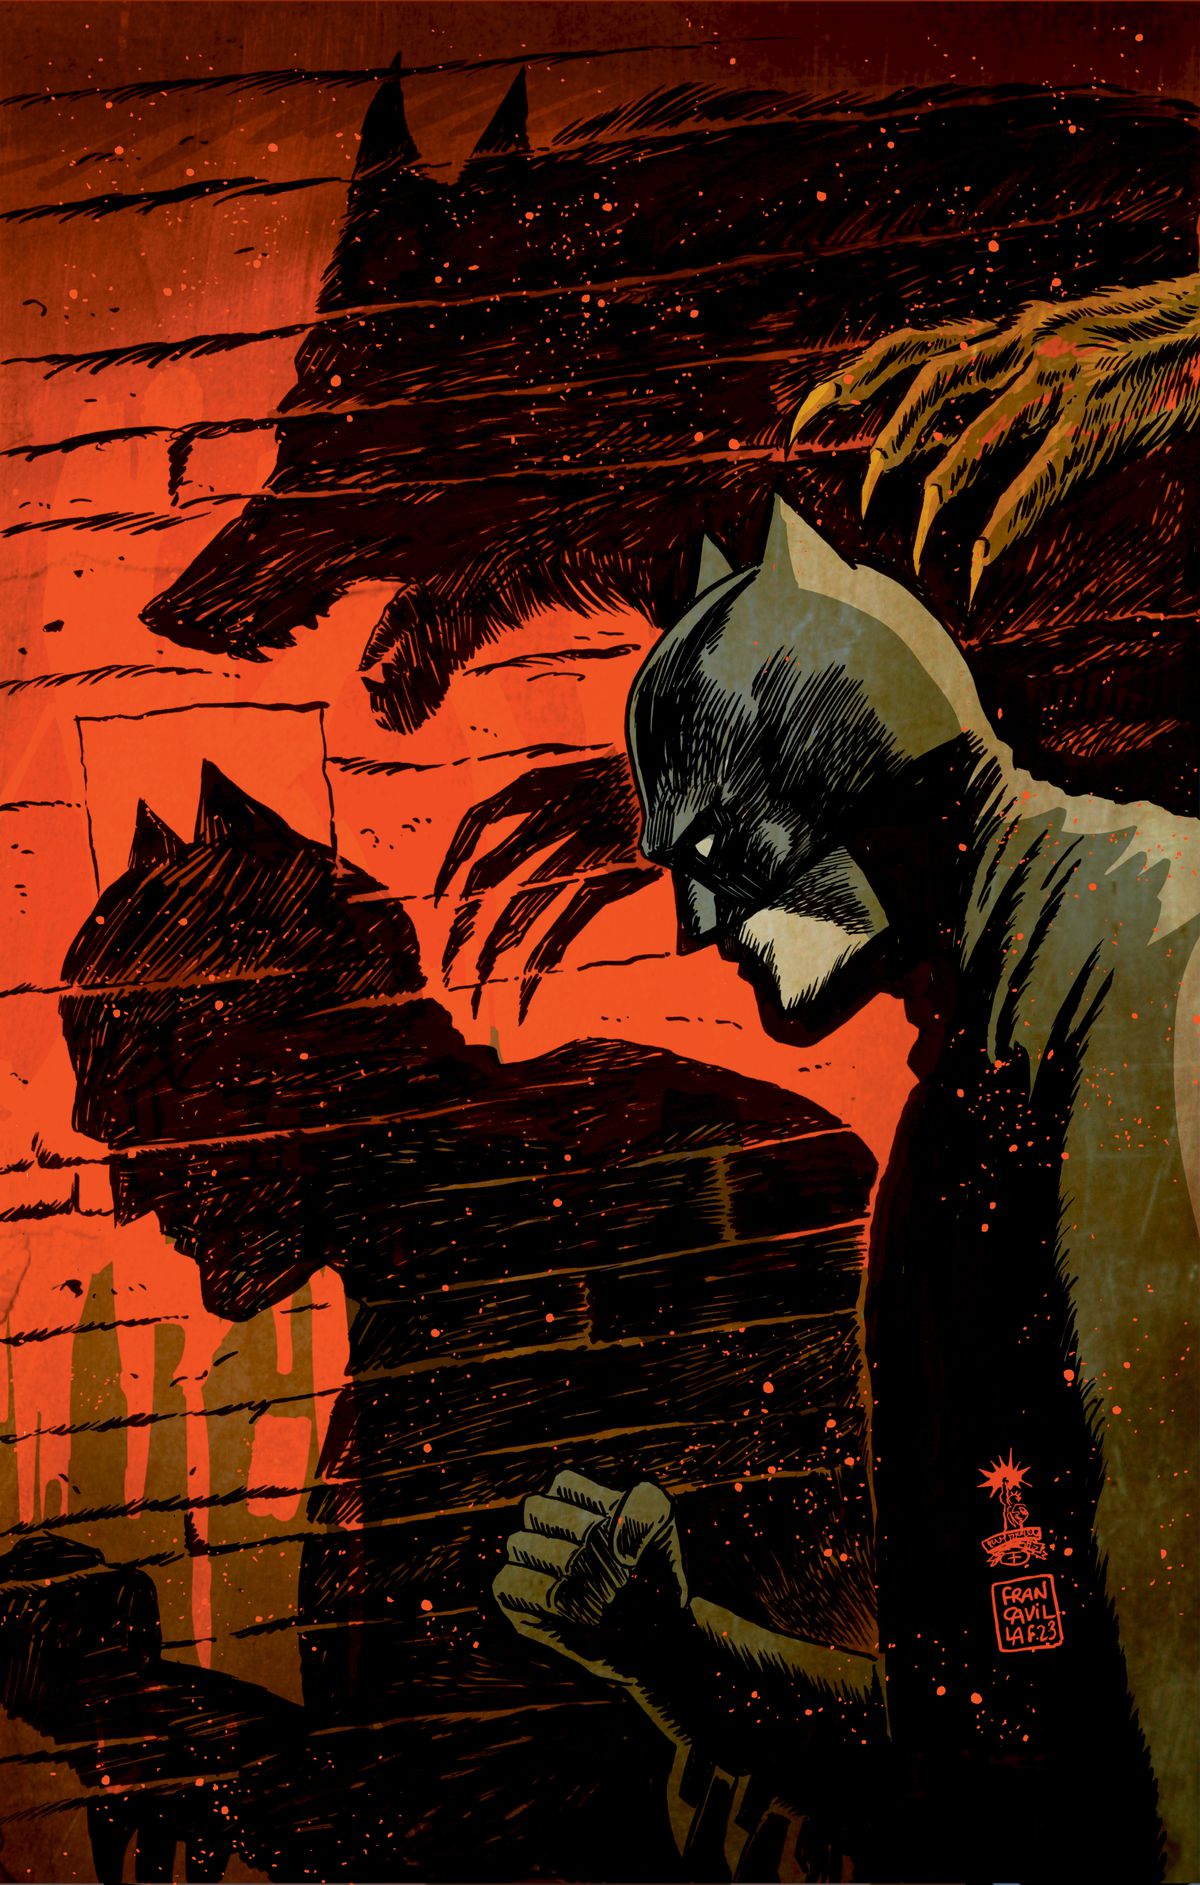 A werewolf lunges at an unwitting Batman, whose shadows are cast on a brick wall behind them, in a variant cover of Batman: Full Moon.